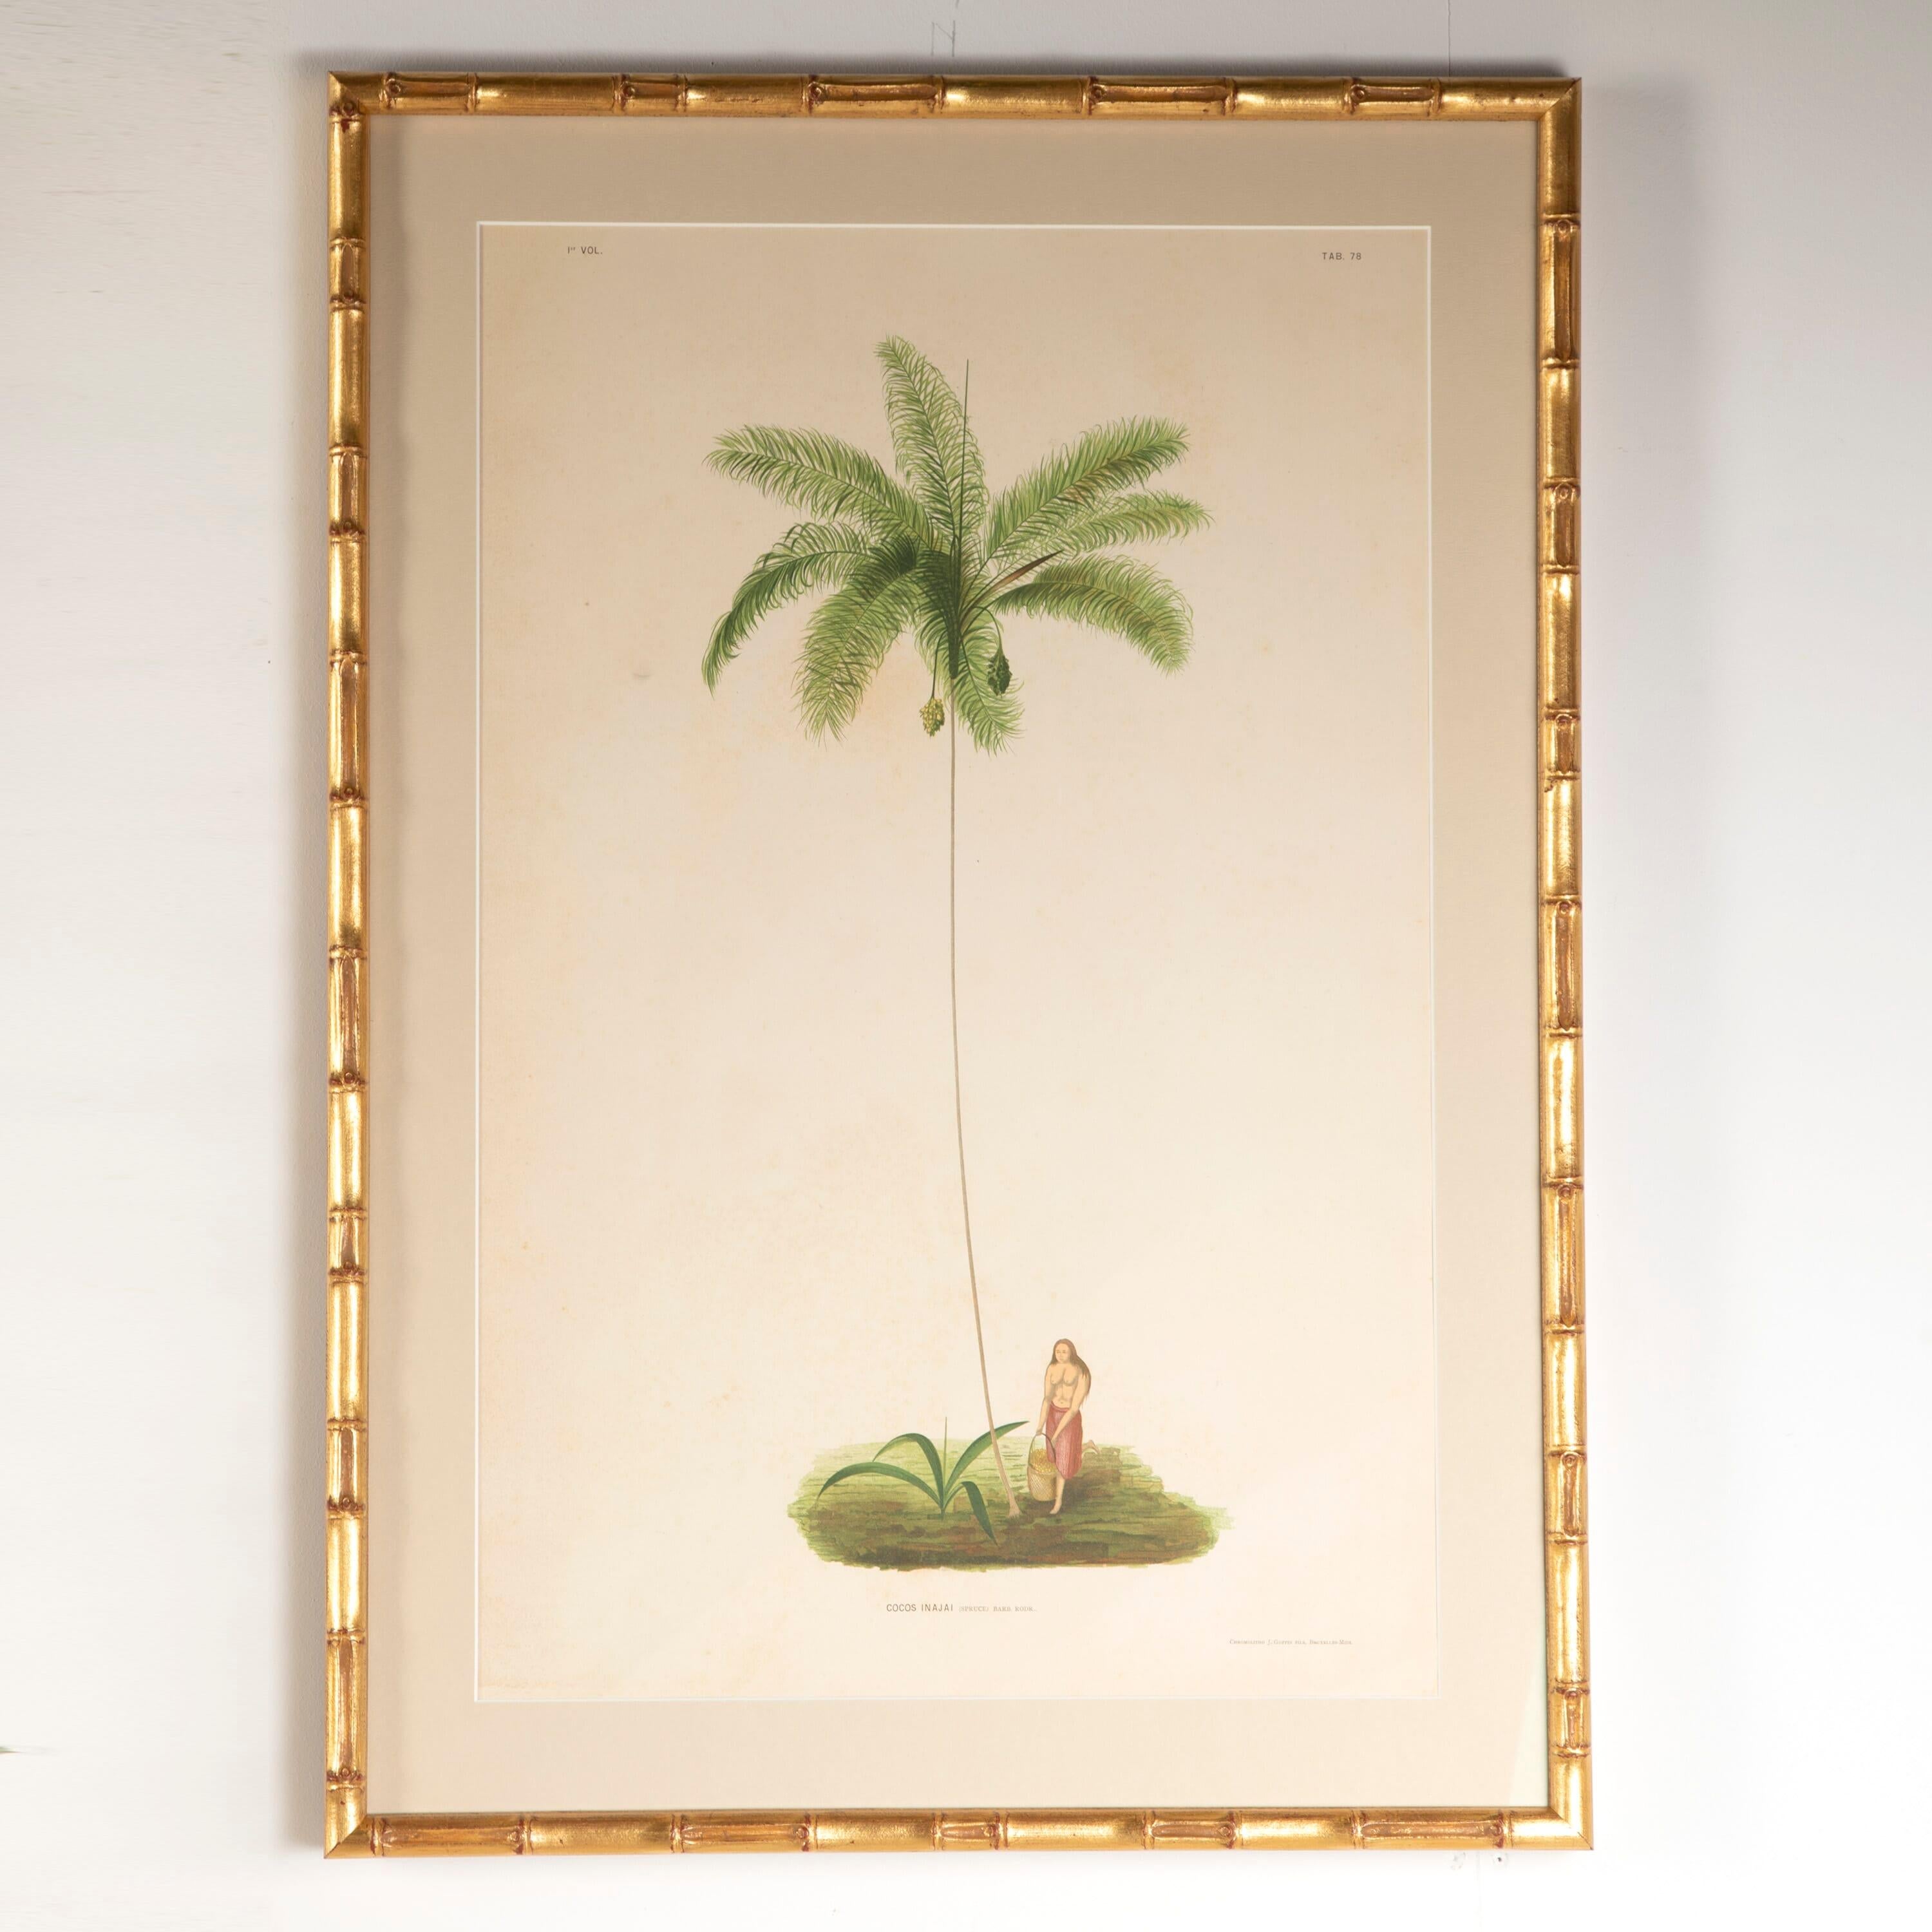 20th Century Six Chromolithographs of Brazilian Palms by Joao Barbosa Rodrigues